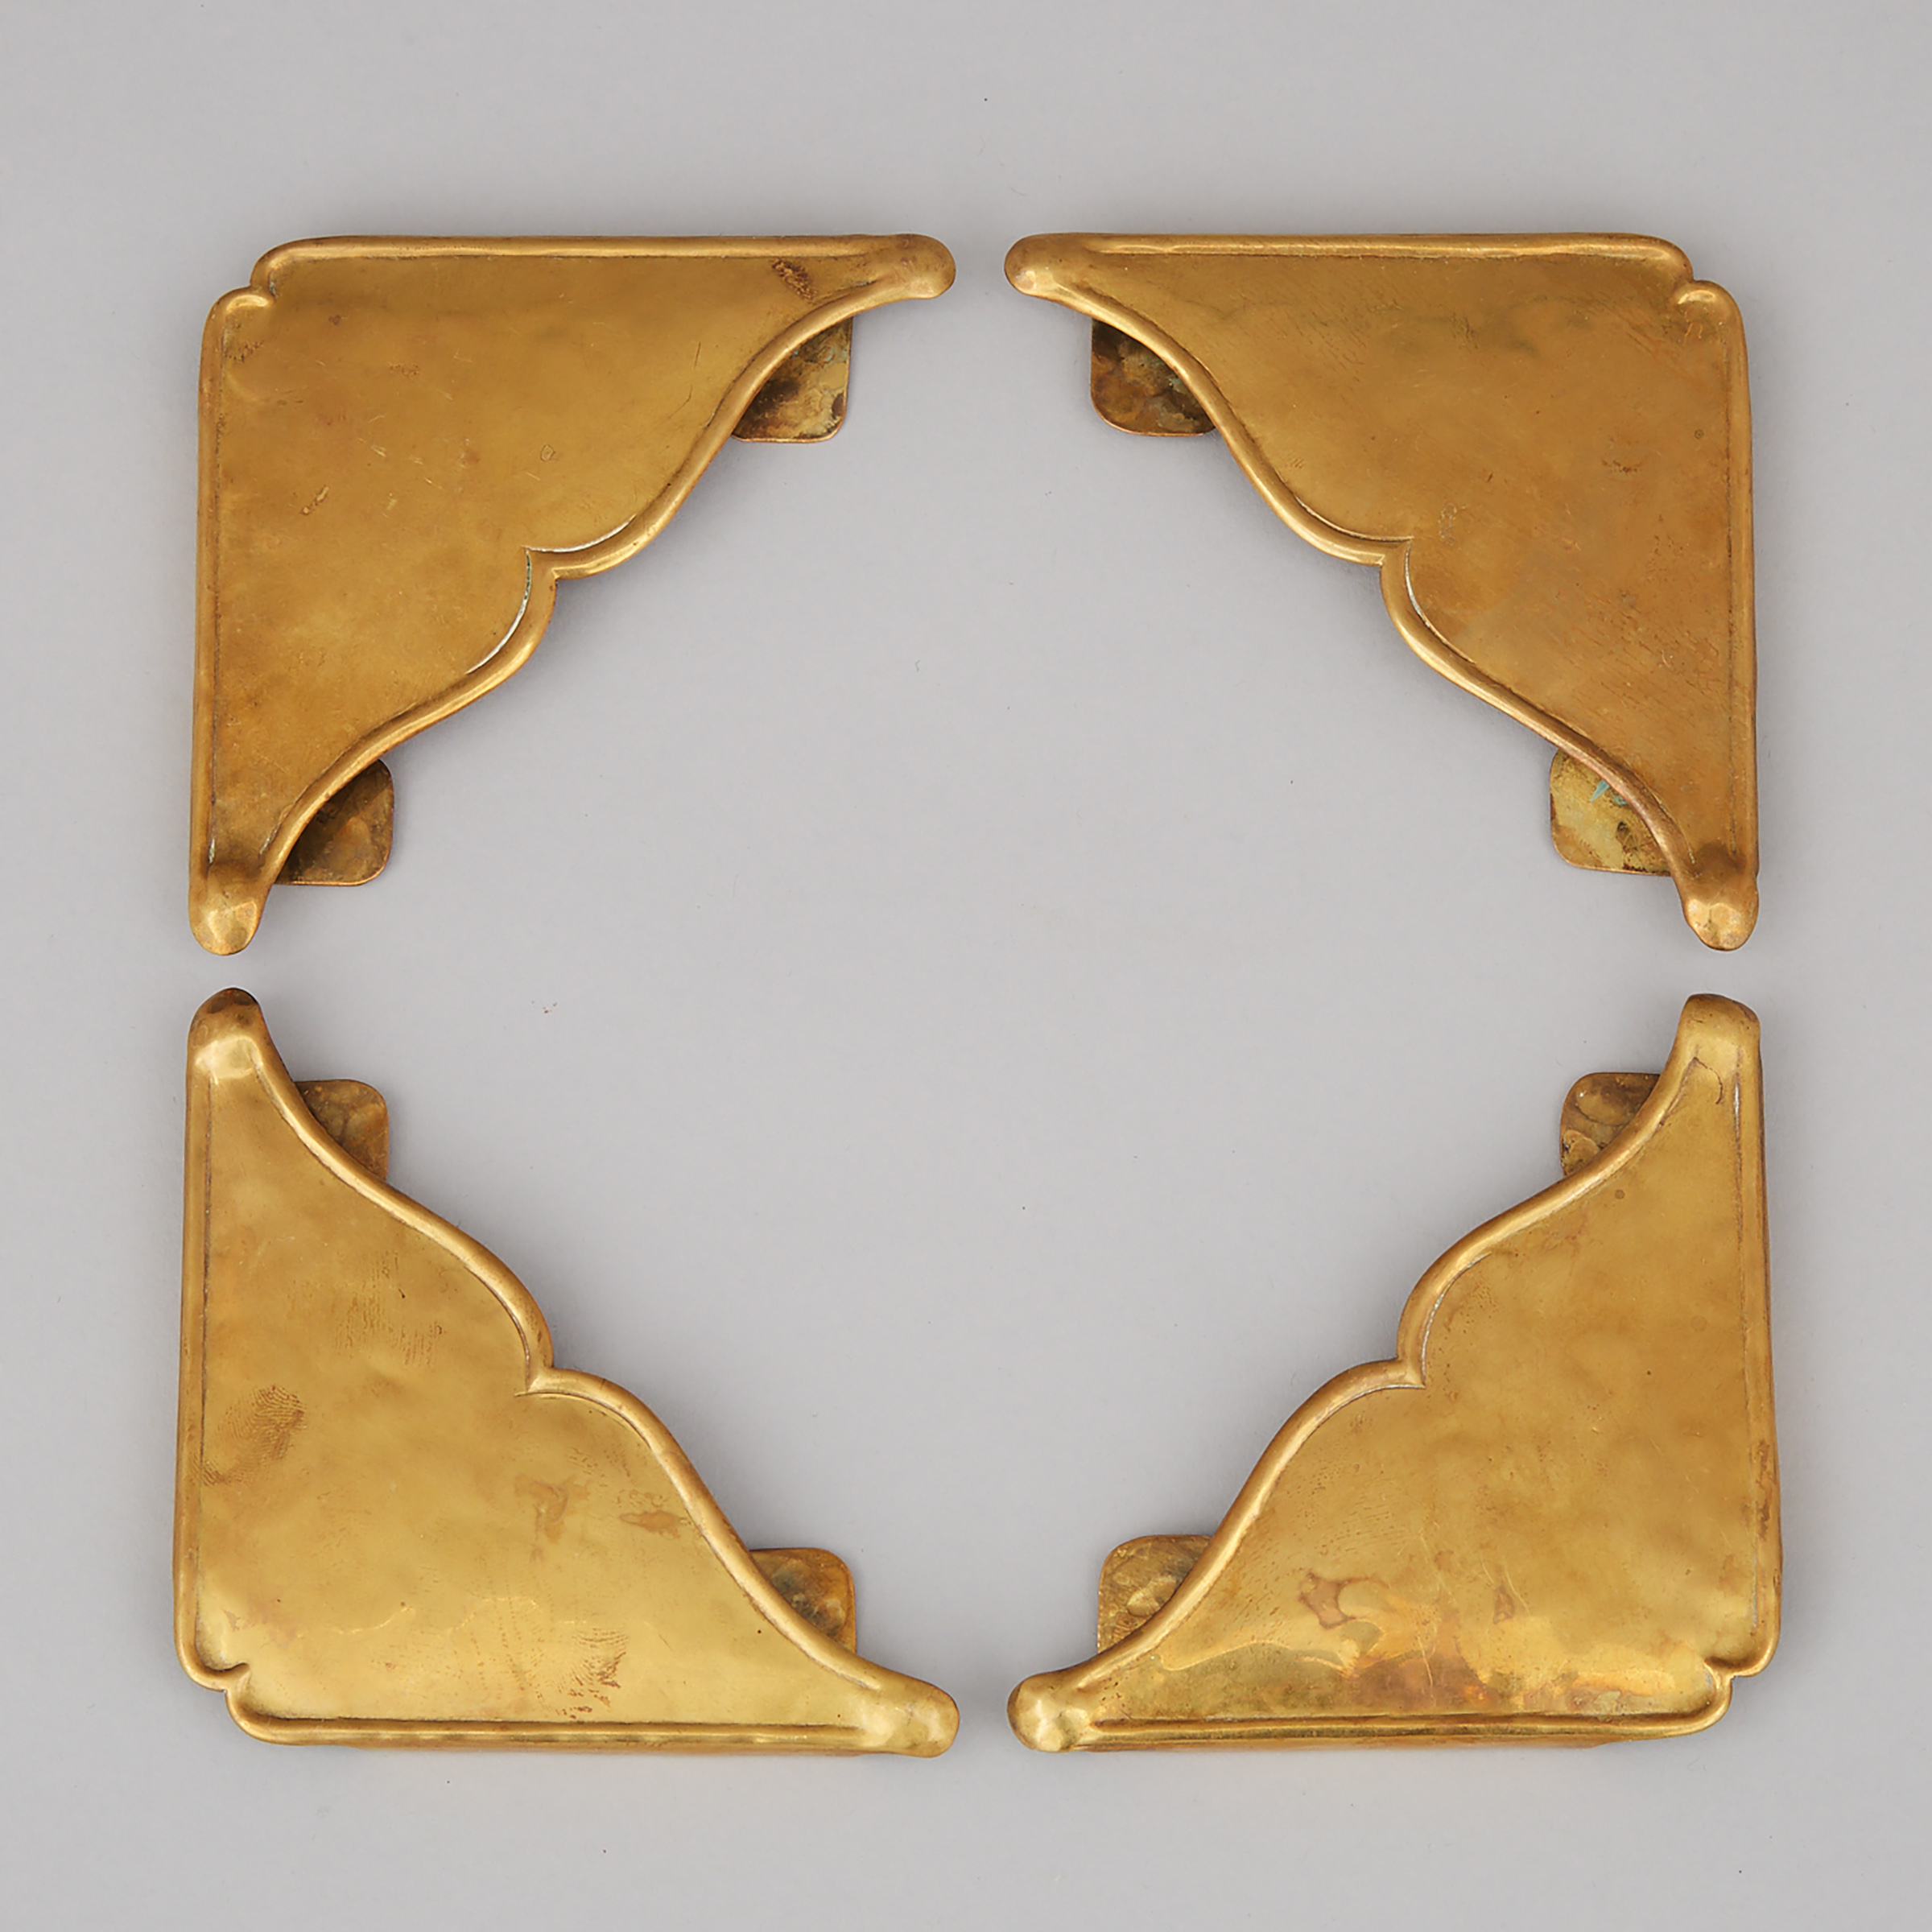 Paul Beau (1871-1941) Set of Hammered Brass Desk Blotter Corners, Montreal, early 20th century